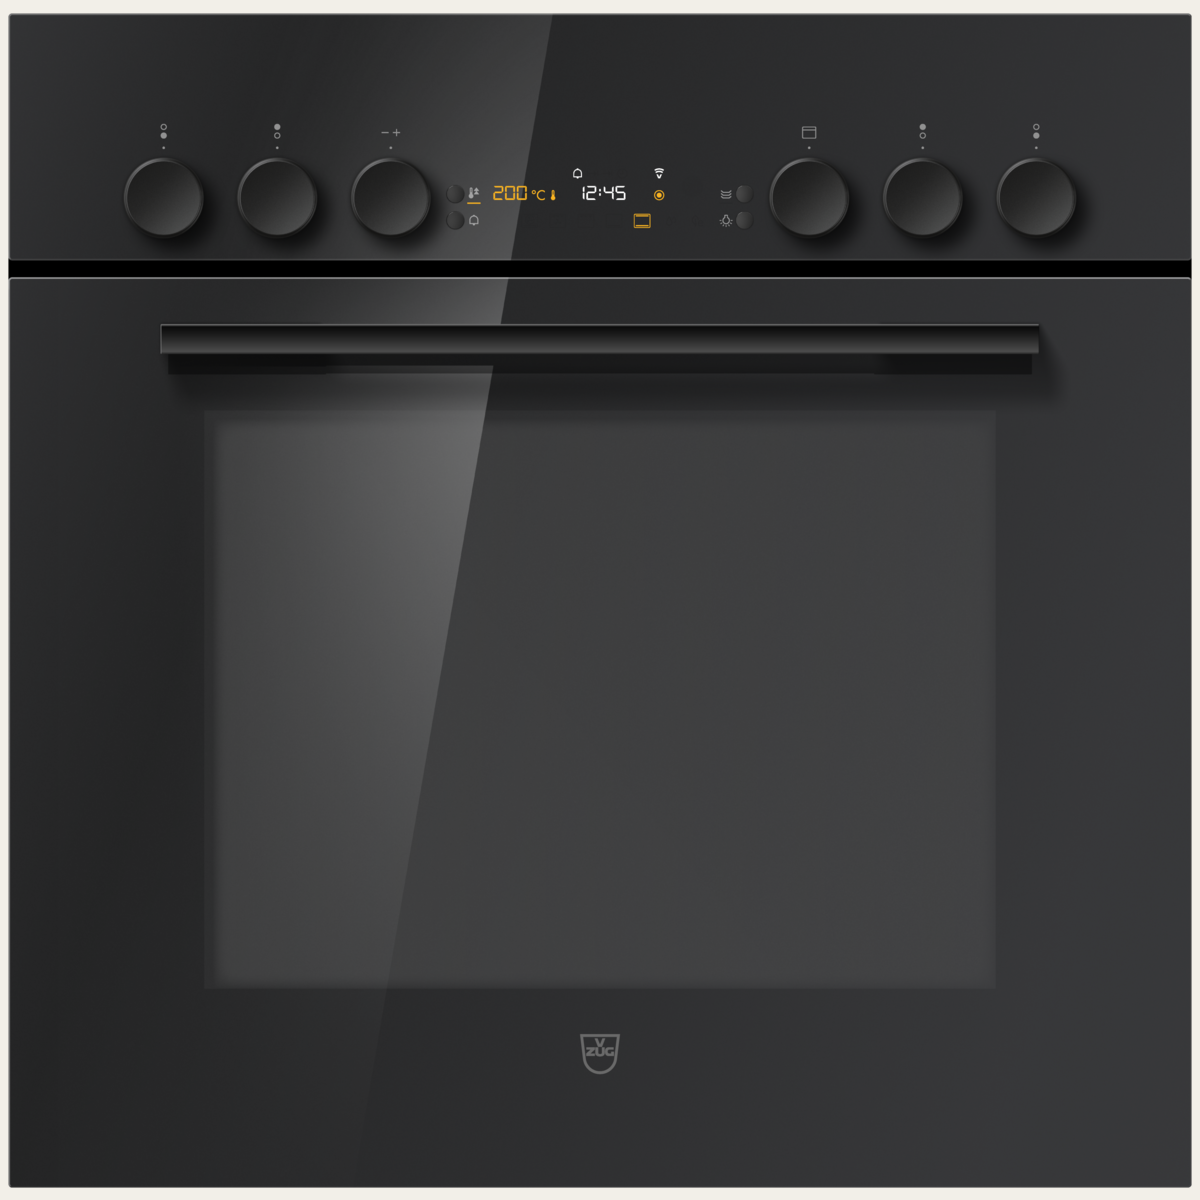 V-ZUG Cooker Combair V600 6UH, Standard width: 60 cm, Standard height: 60 cm, Nero with glass, Handle: Nero, dial, V-ZUG-Home, TopClean, Number of controllable cooking zones: 4